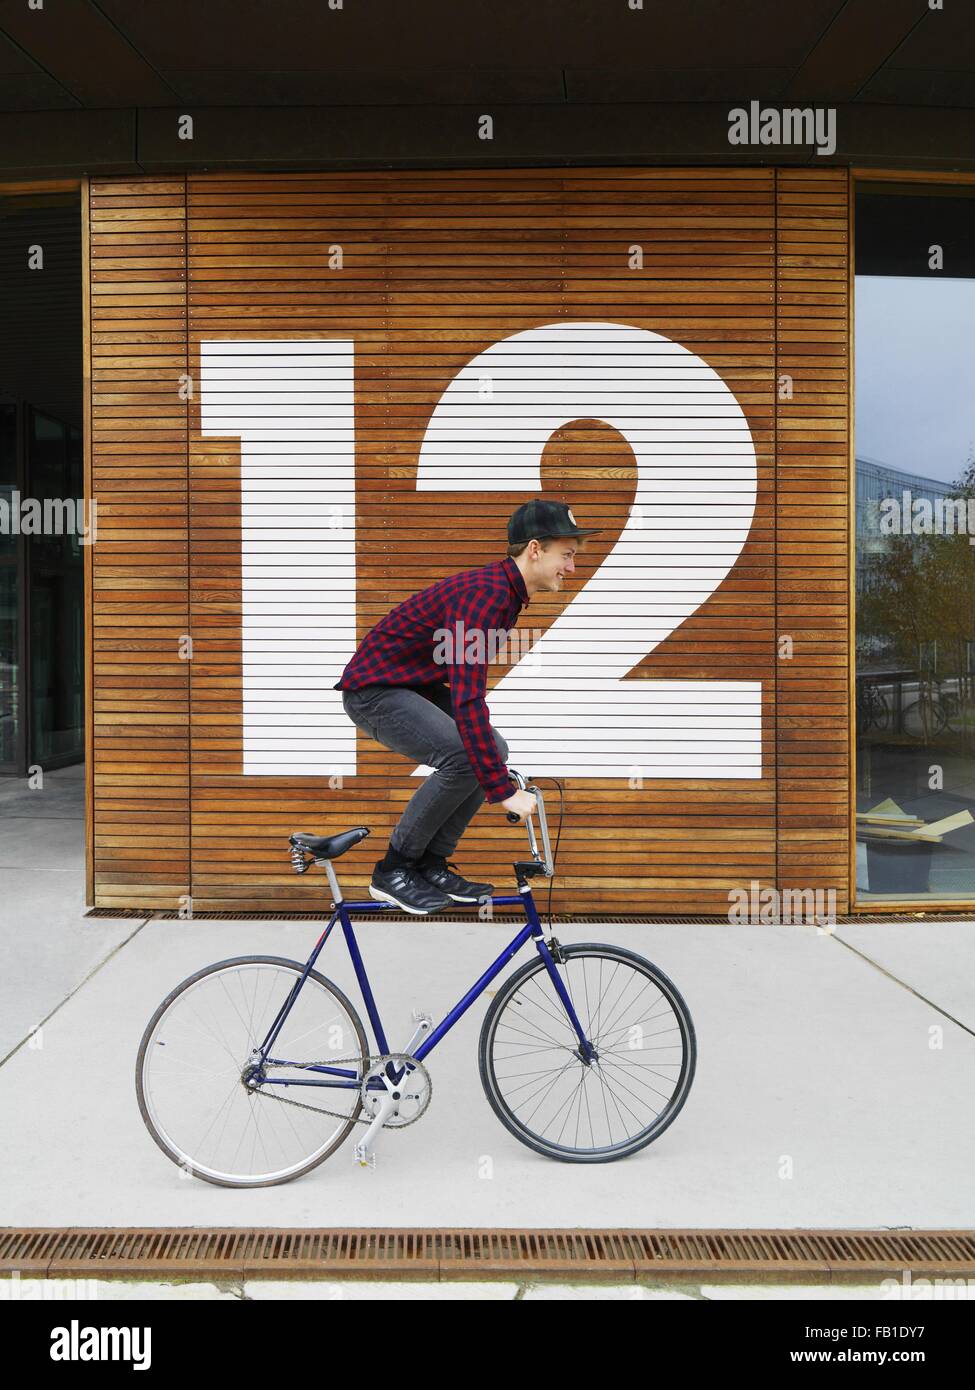 Urban cyclist balancing on bicycle in front of numbered wooden wall Stock Photo